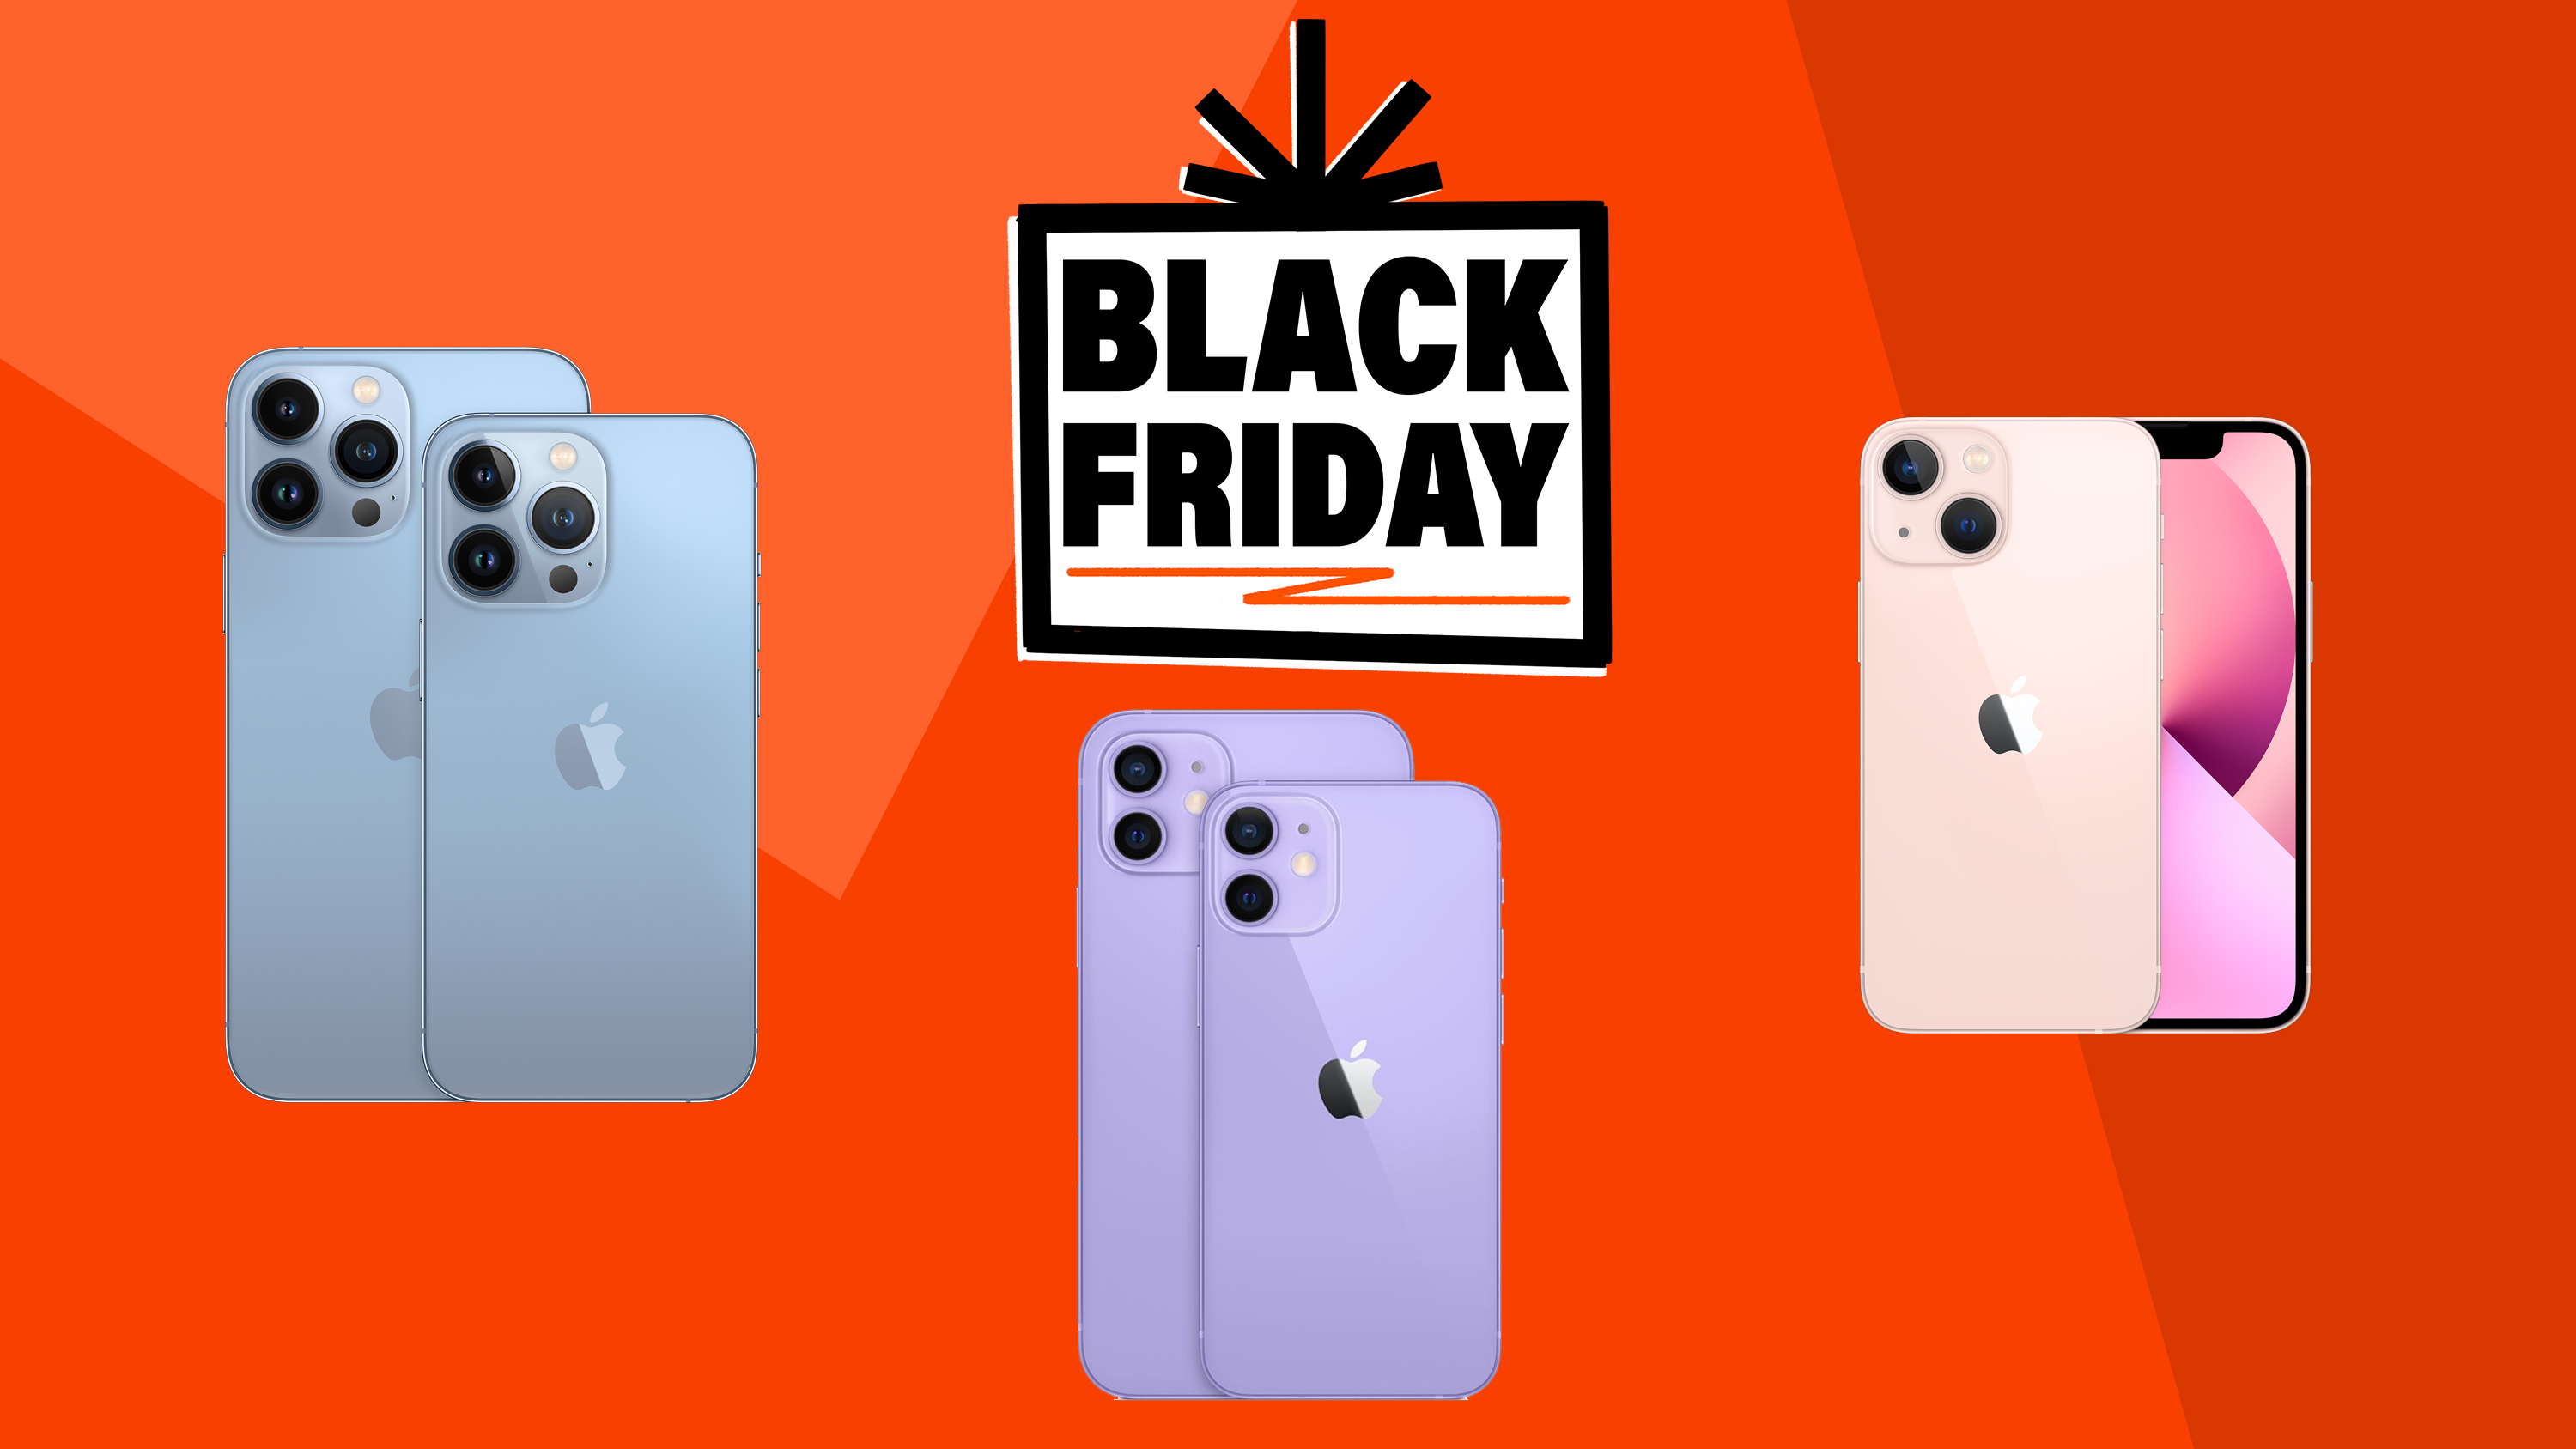 Get an iPhone for free (or close to it) during these Black Friday 2021 sales